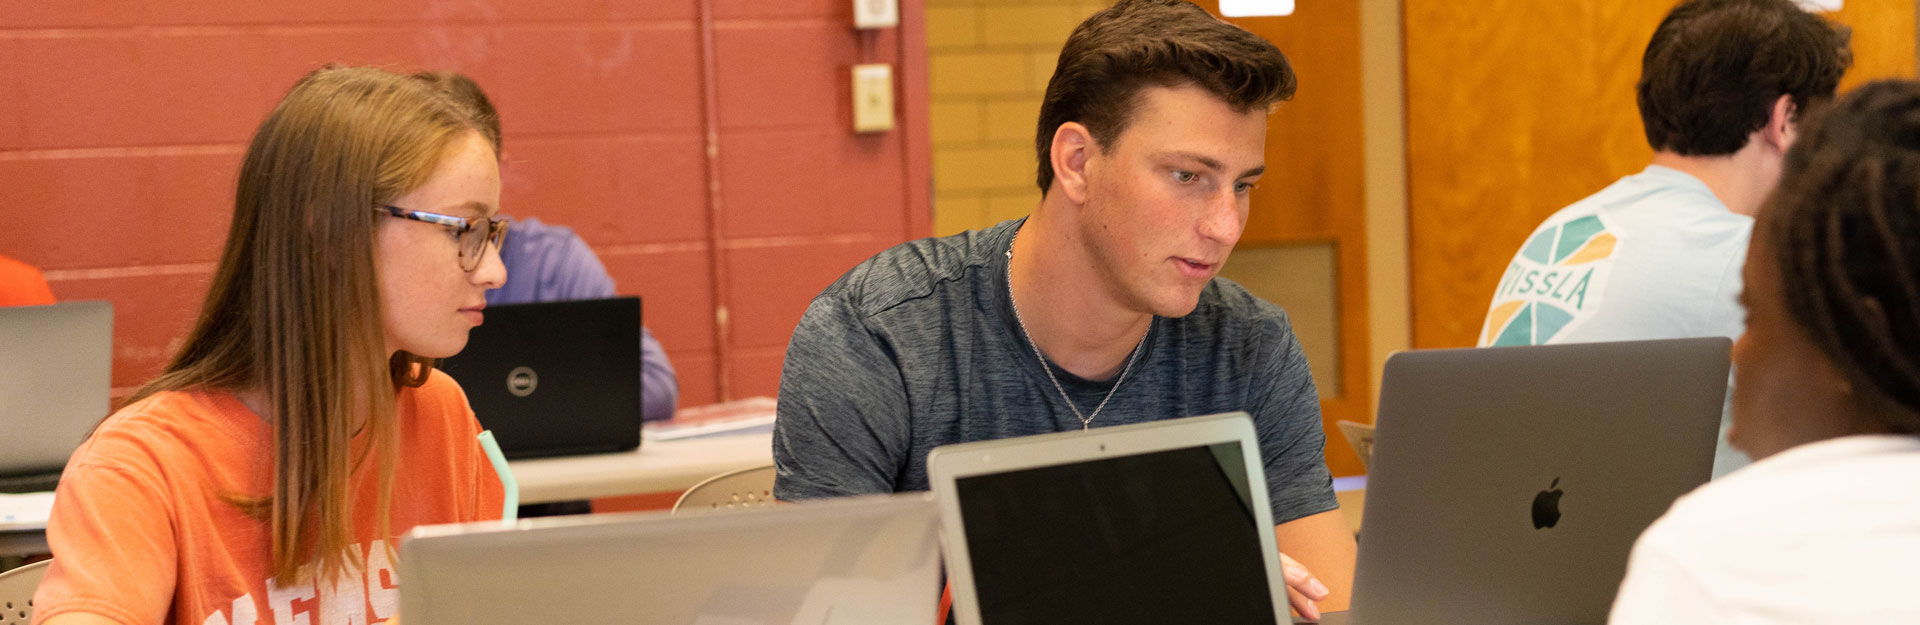 groups of students work on laptops in a Clemson classroom